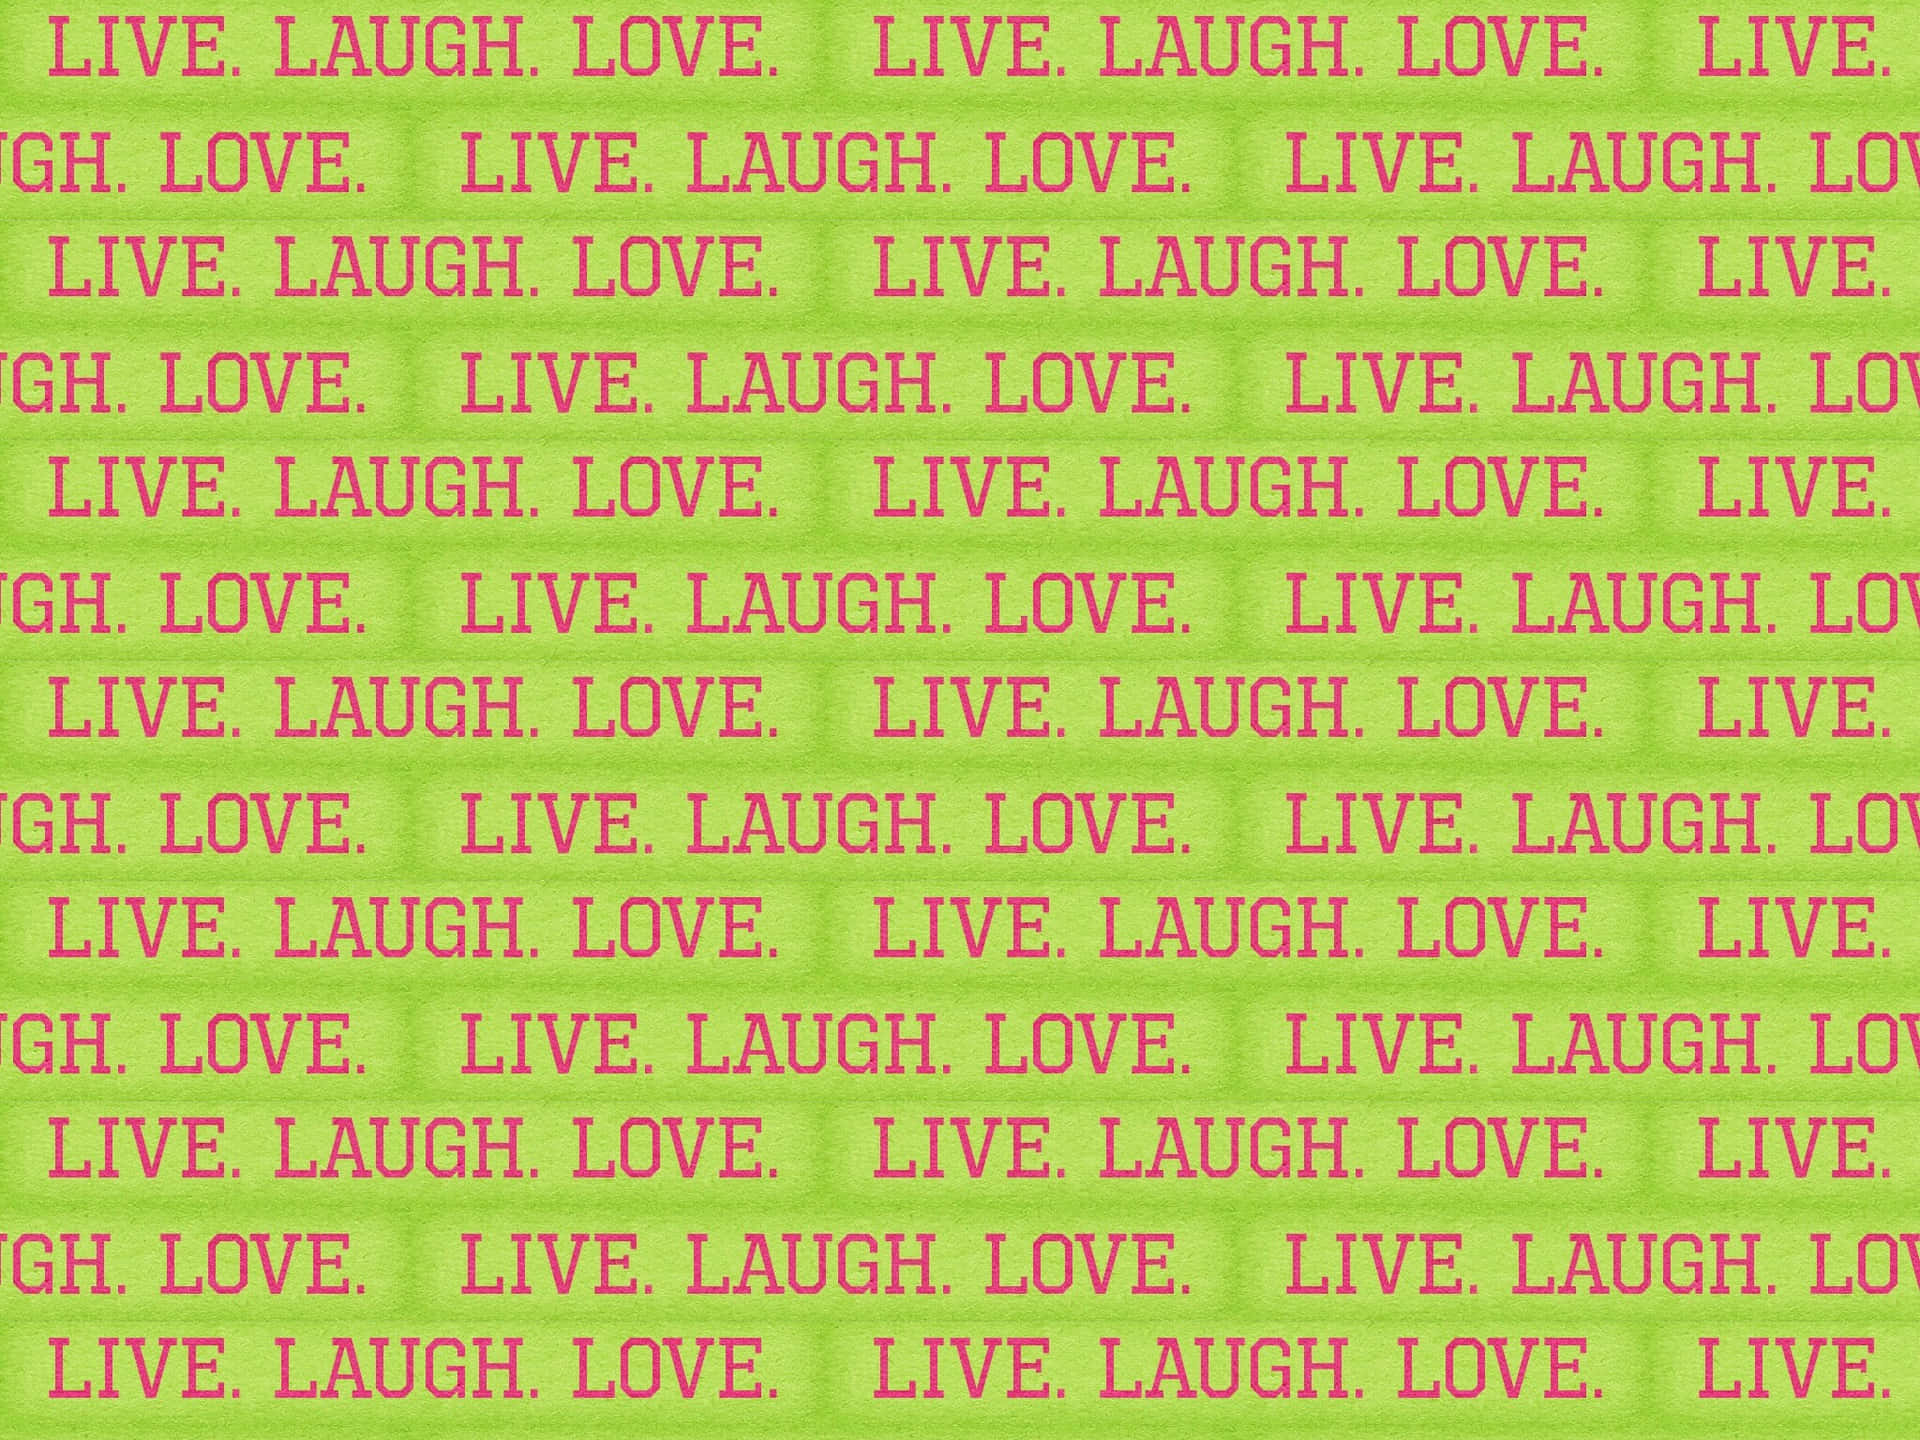 That perfect moment when all you need is “Live, Laugh, Love.” Wallpaper